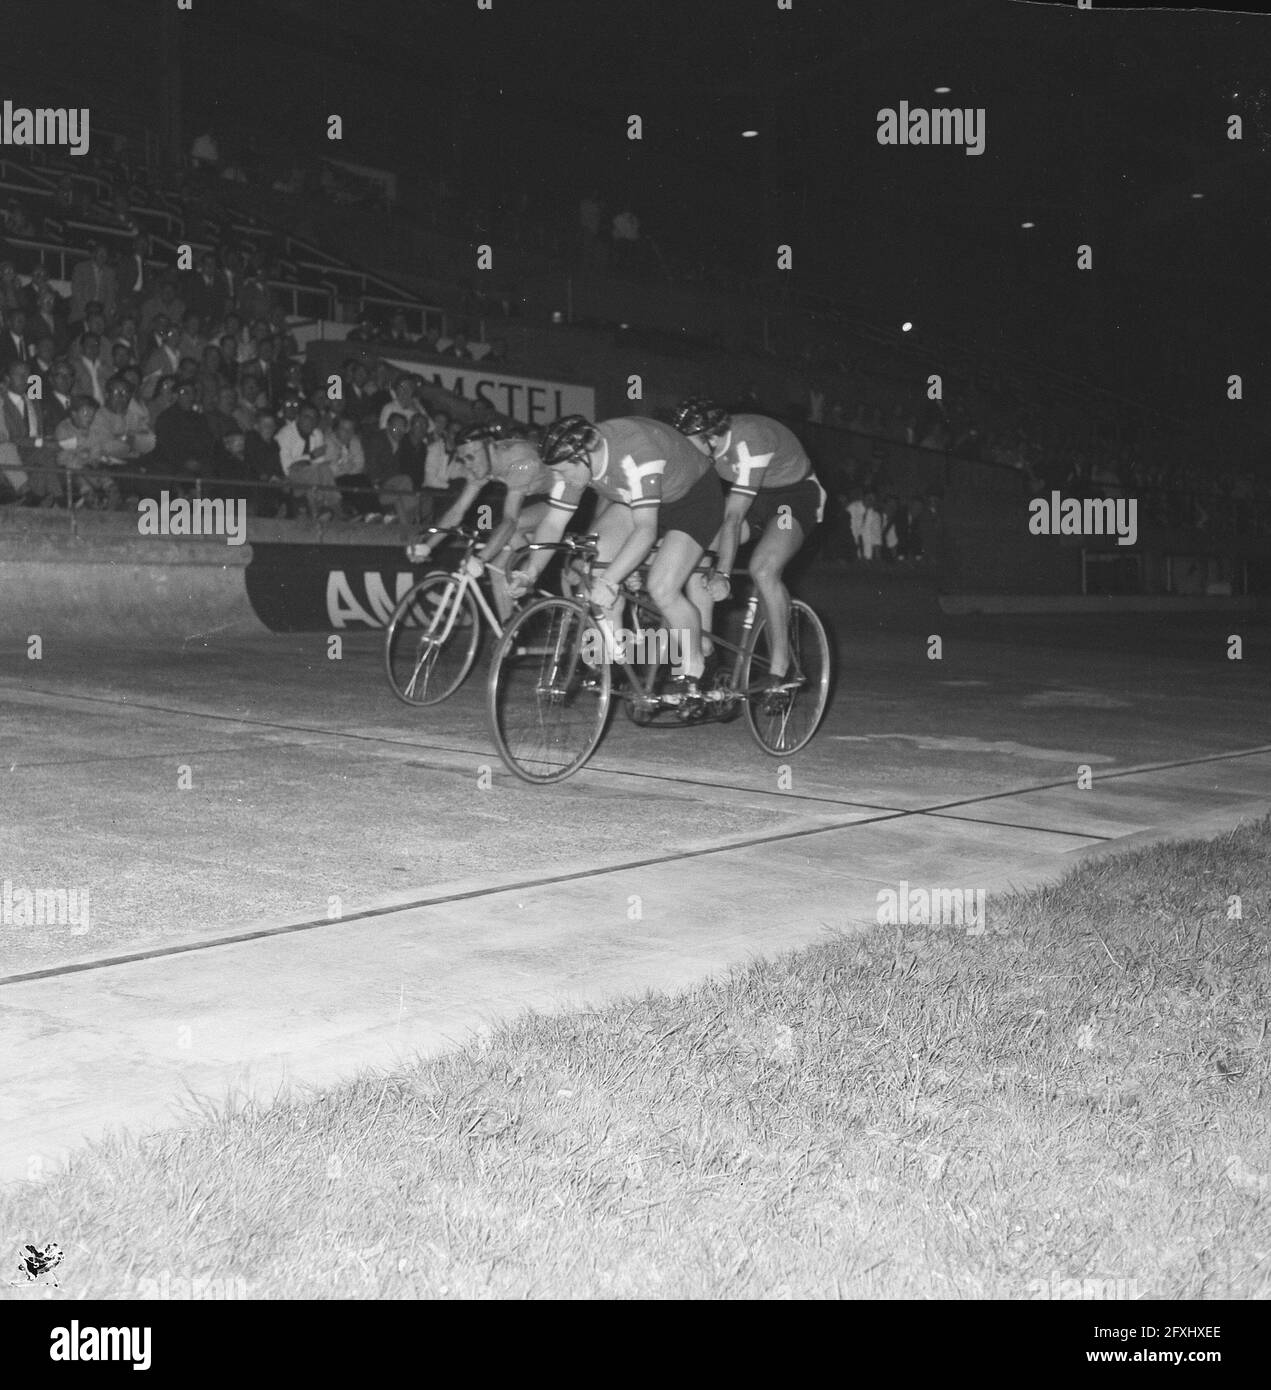 Cycling Netherlands v. Denmark. Tandem, August 11, 1967, WIELRENNEN, tandems, The Netherlands, 20th century press agency photo, news to remember, documentary, historic photography 1945-1990, visual stories, human history of the Twentieth Century, capturing moments in time Stock Photo